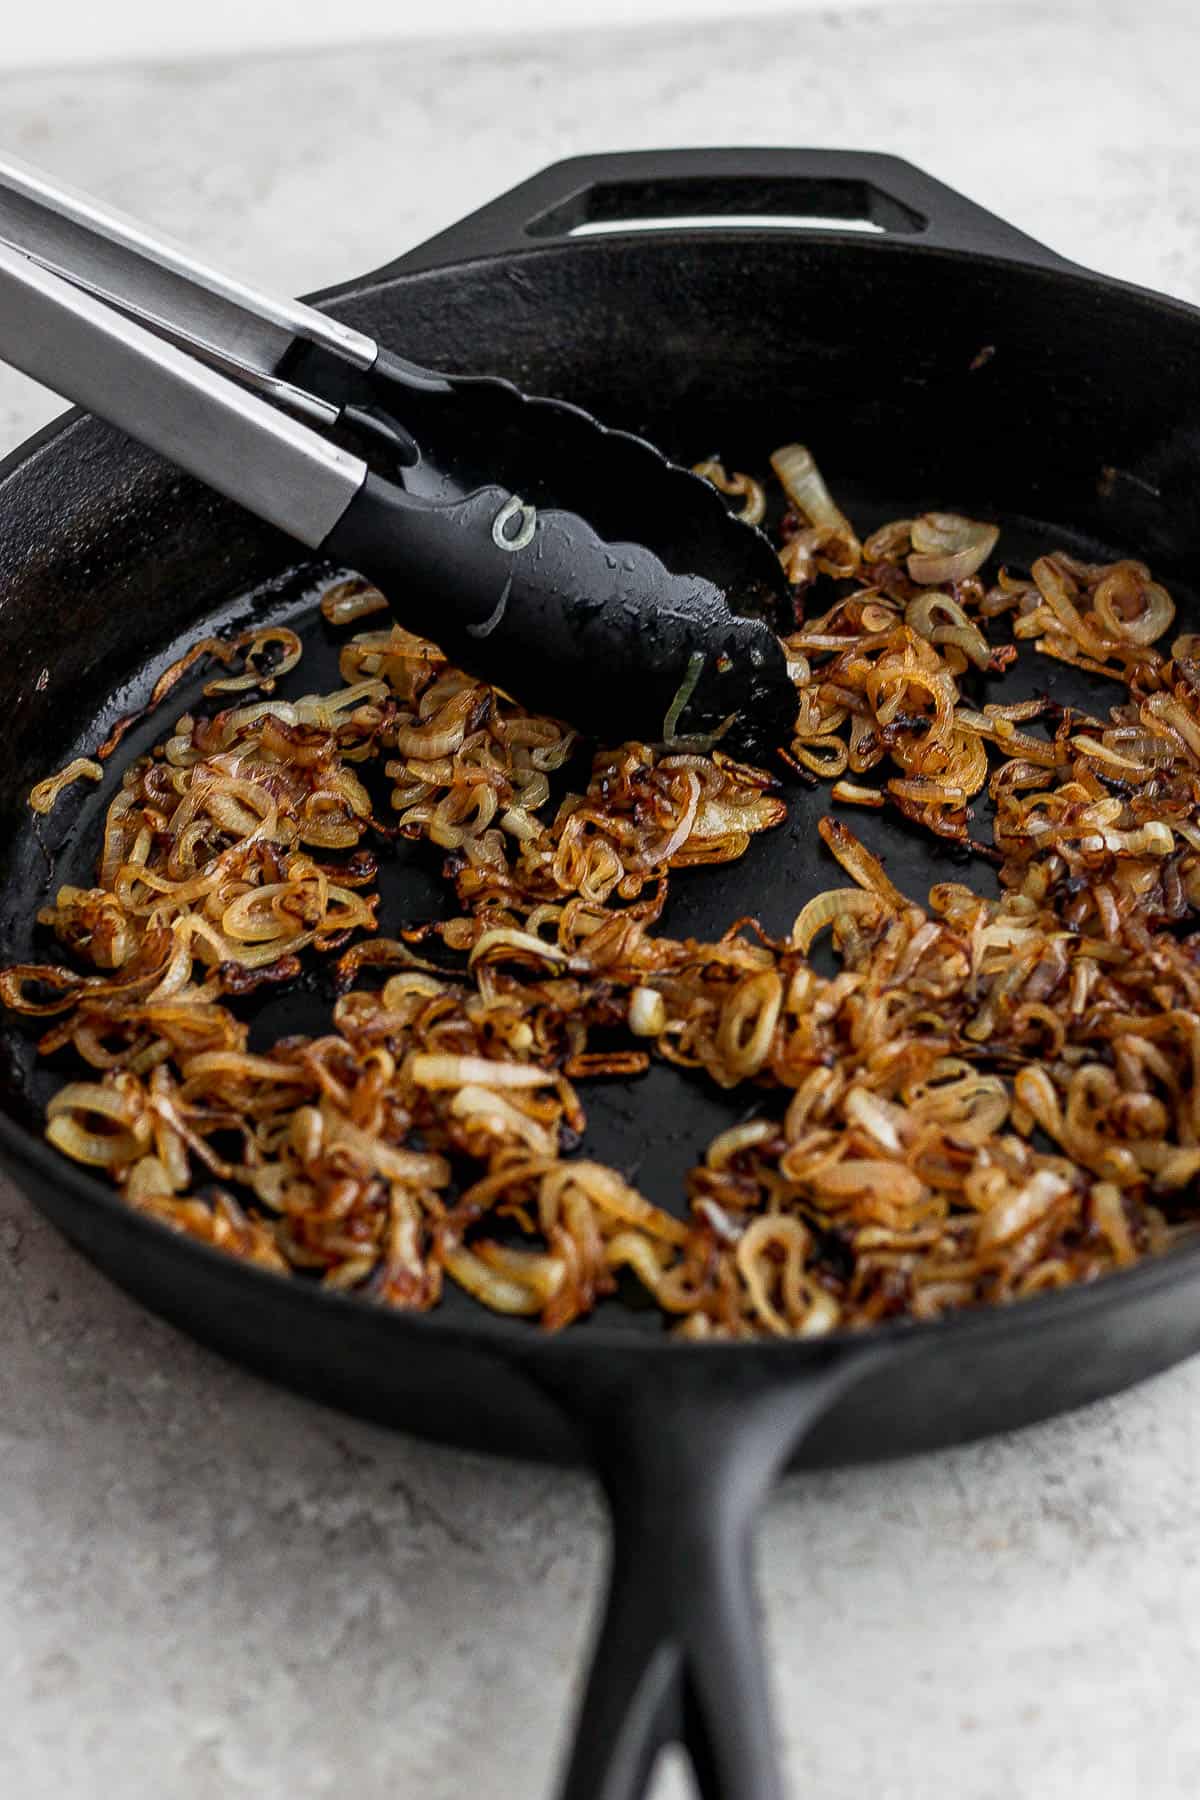 A pair of tongs moving crispy shallots around in a skillet.